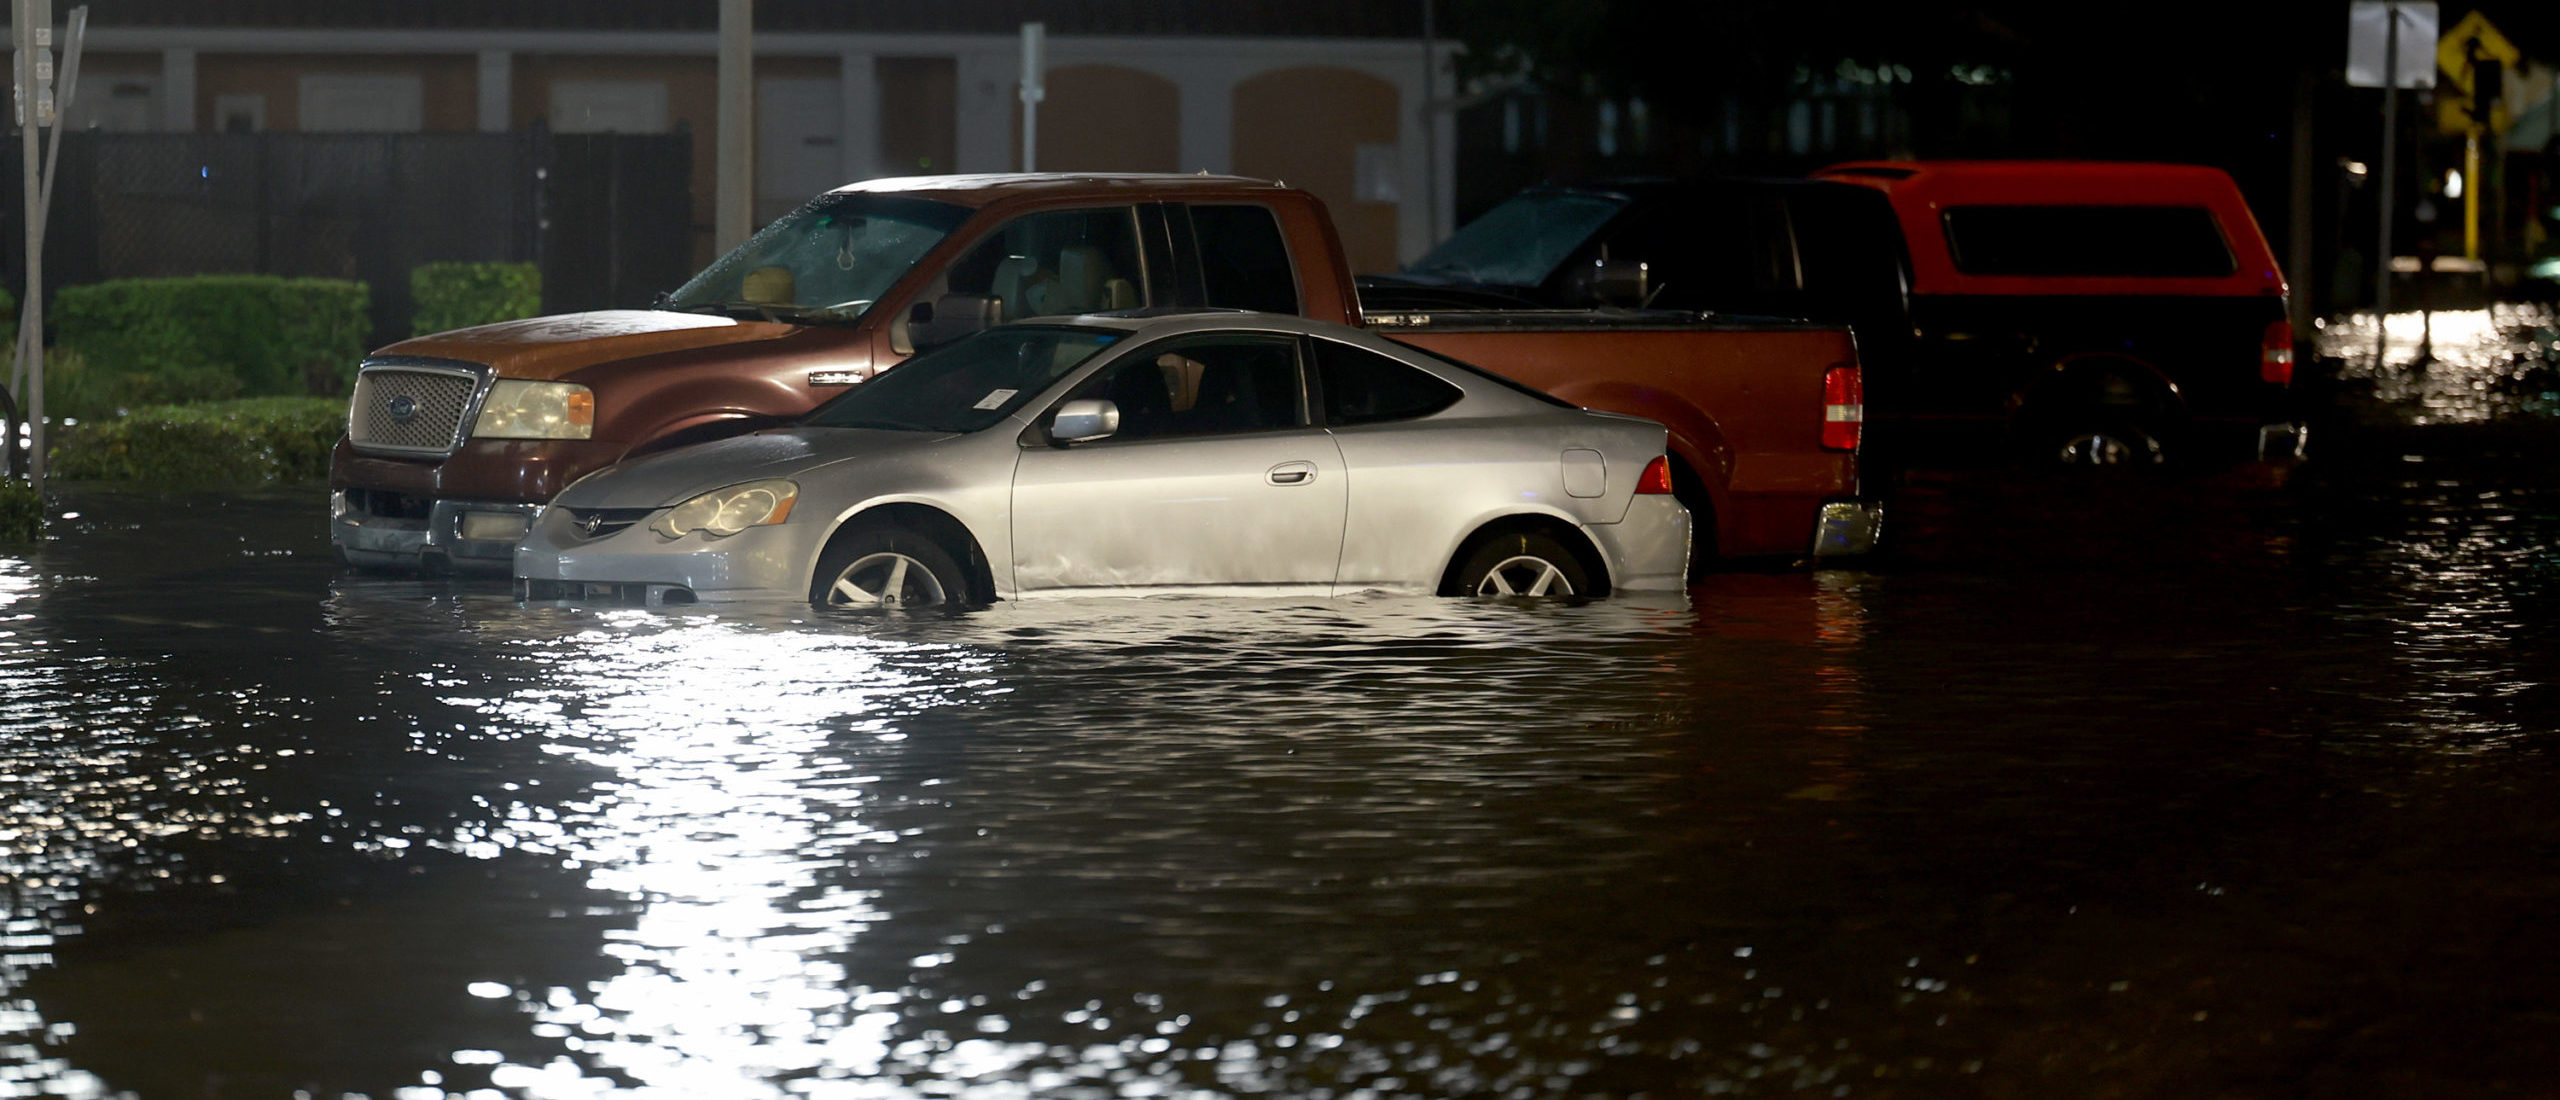 ST PETERSBURG, FLORIDA - AUGUST 30: Vehicles sit in a flooded street caused by Hurricane Idalia passing offshore on August 30, 2023 in St. Petersburg, Florida. Hurricane Idalia is hitting the Big Bend area of Florida. (Photo by Joe Raedle/Getty Images)